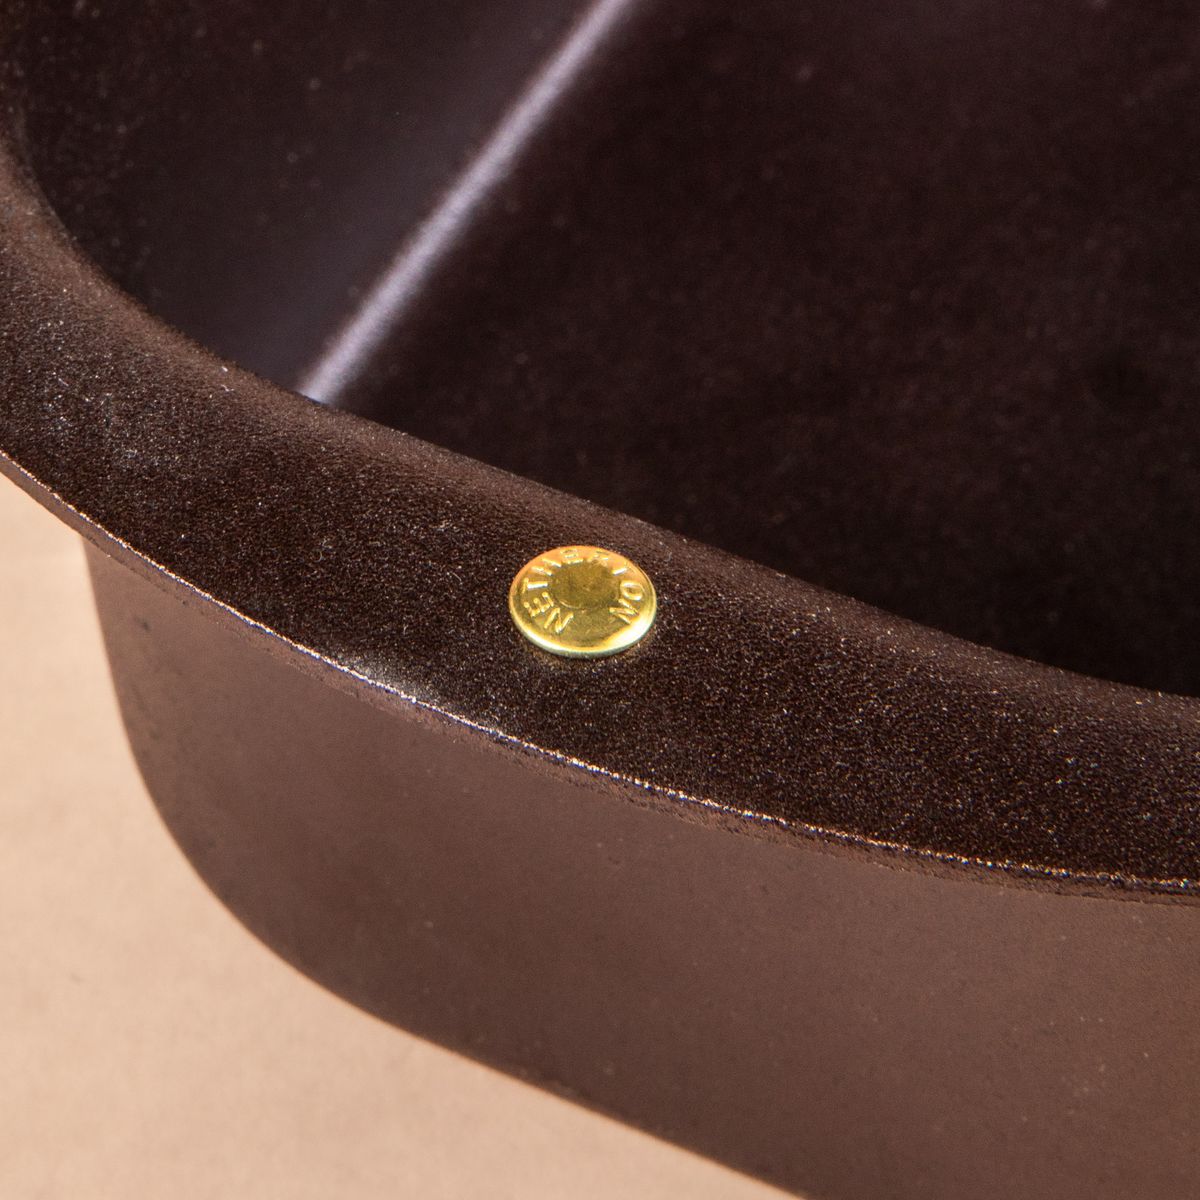 Close up of a gold branded screw on the edge of a black metal loaf pan